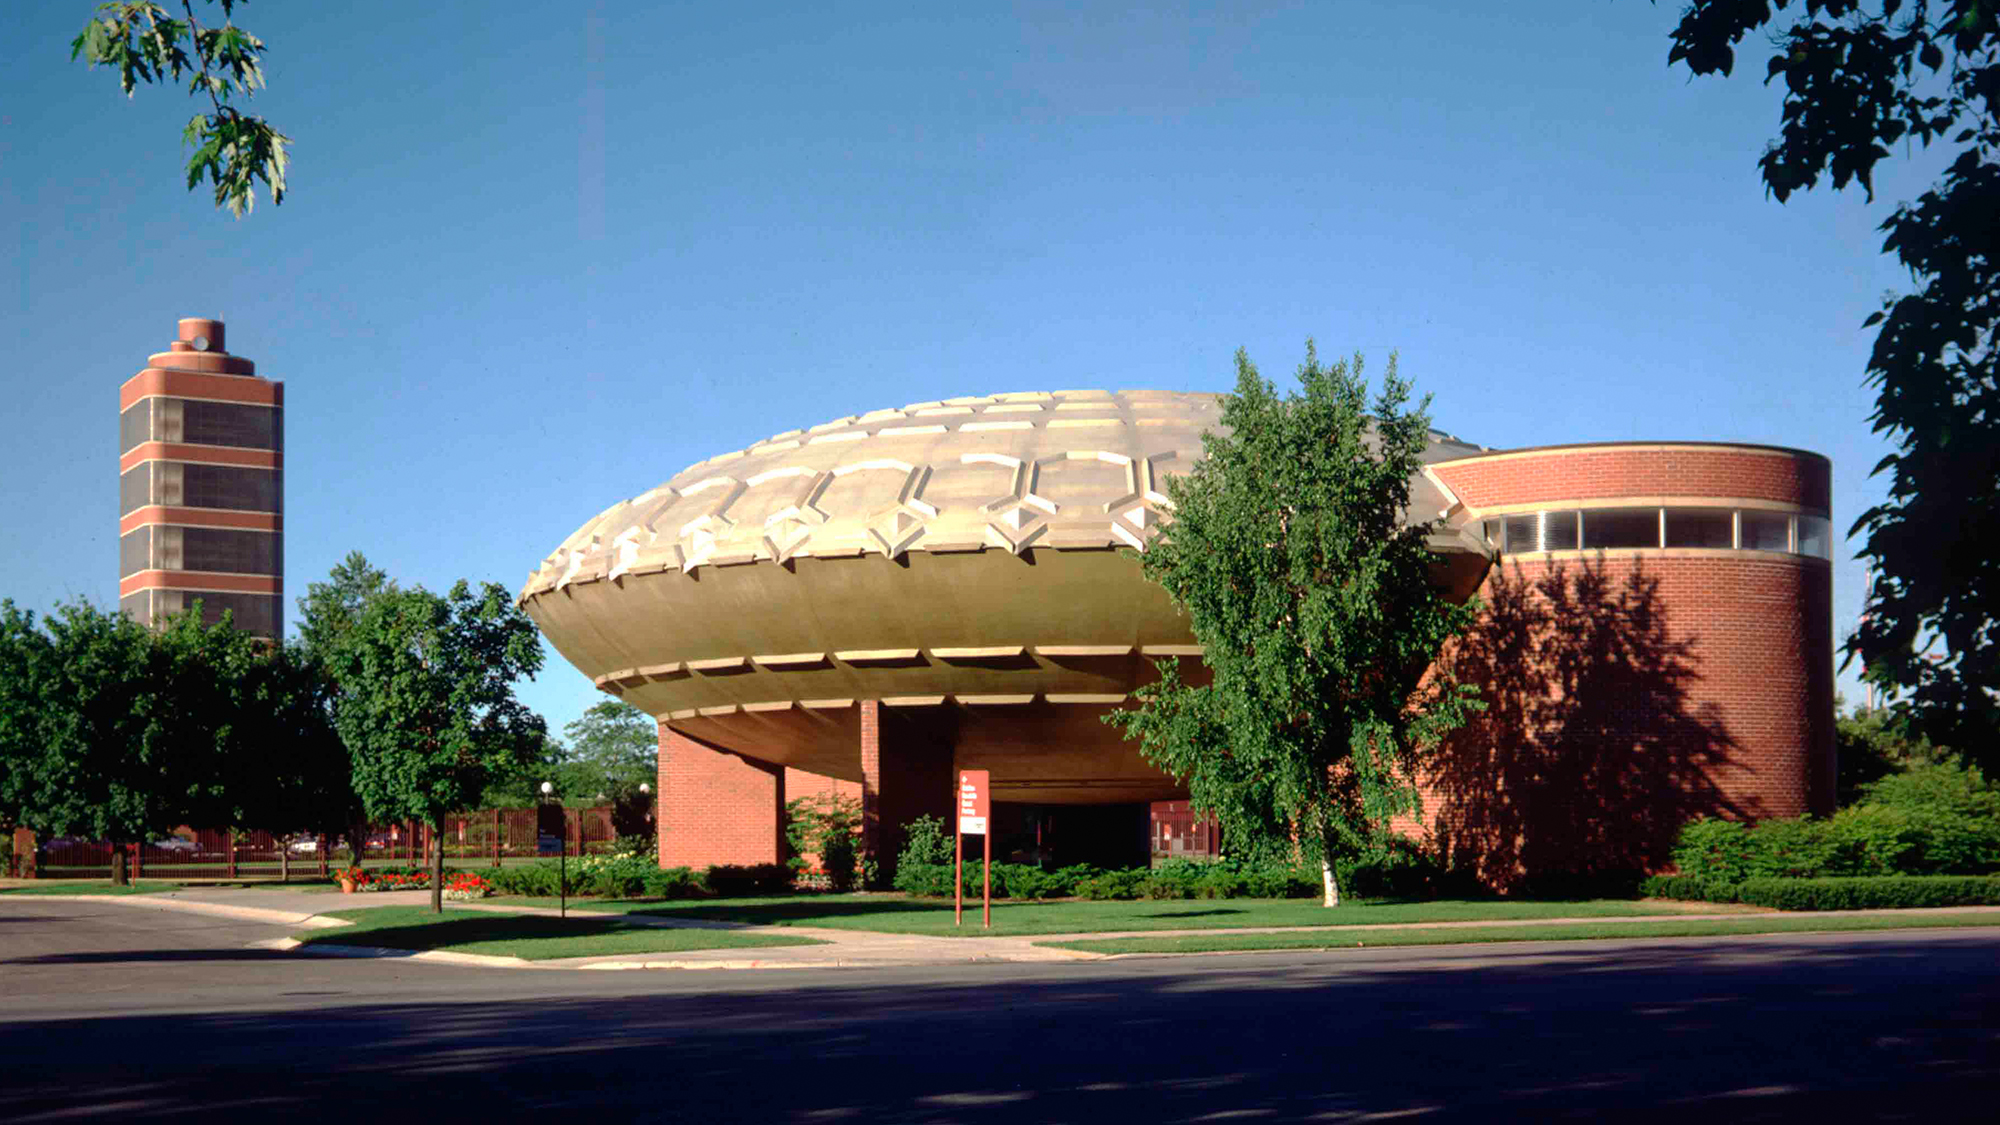 The Golden Rondelle Theater sits at the entrance to our global headquarters campus.